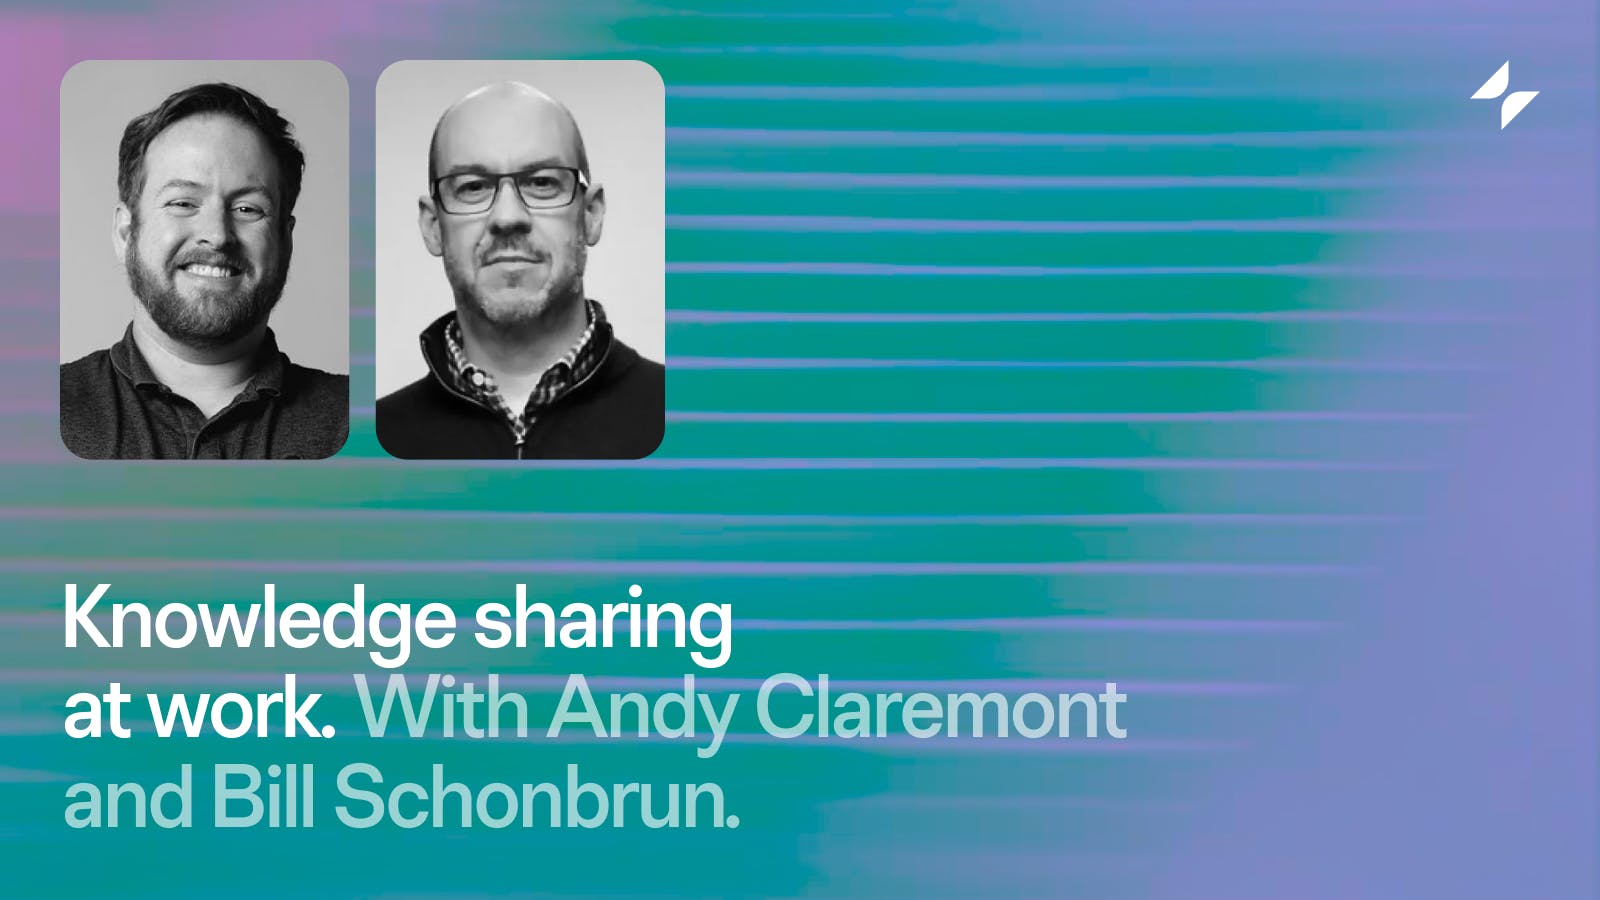 Knowledge Sharing at Work with Bill Schonbrun, CarboNet COO